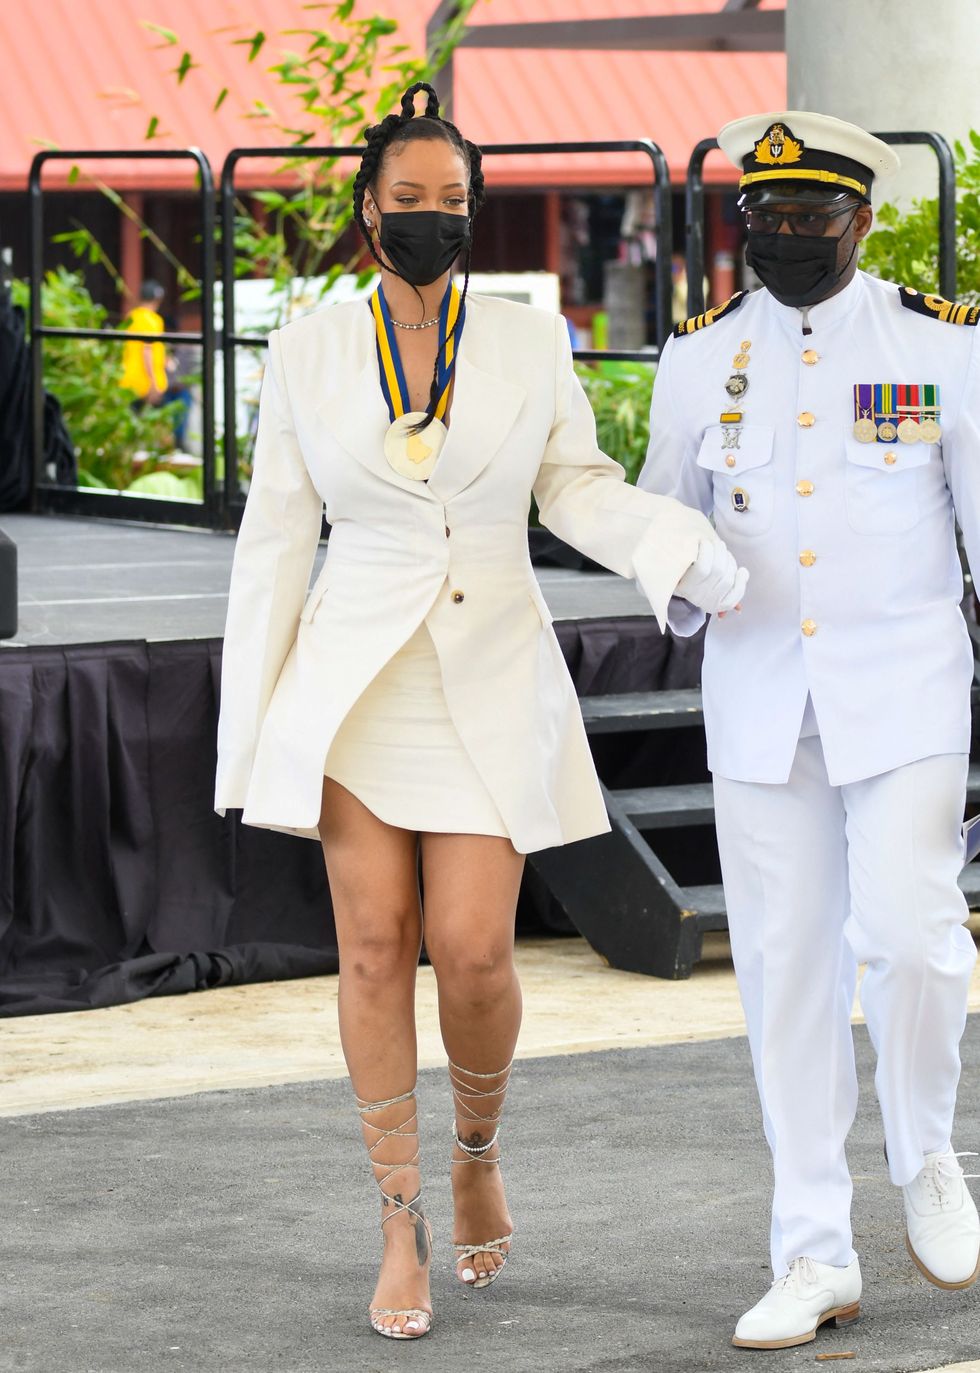 rihanna during the national honors ceremony in a white dress and blazer